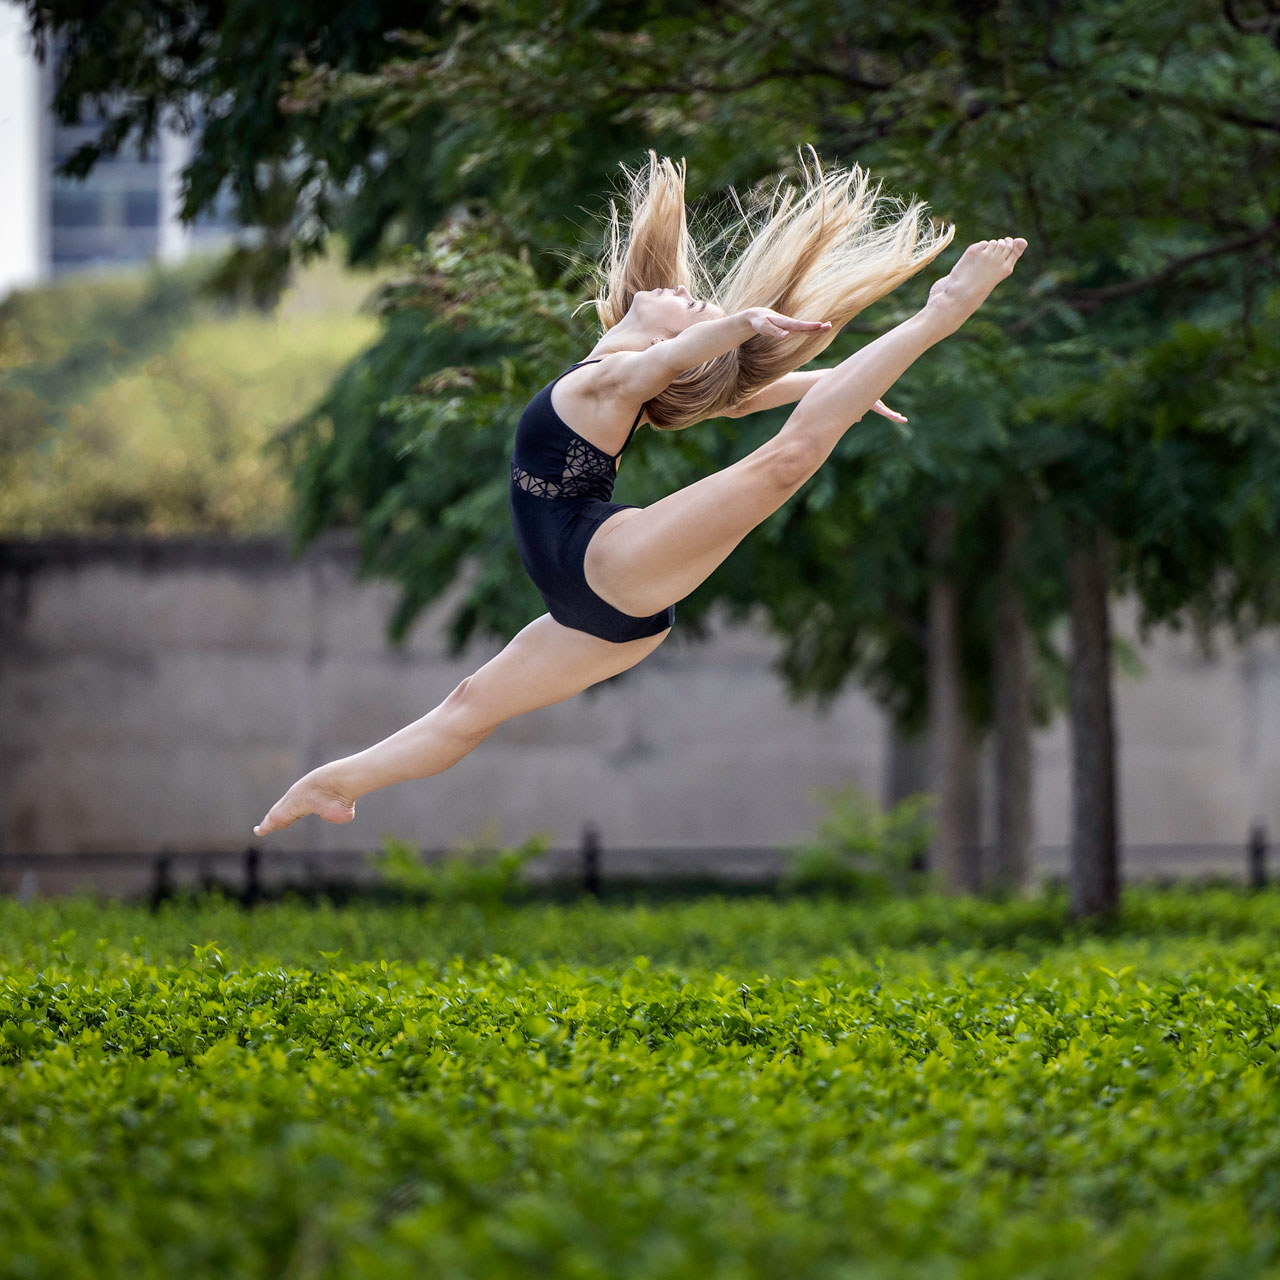 During an Exulting Images’ dance photoshoot outdoors a blonde dancer wearing a navy blue leotard leaps across a blurred lush green background of bushes and trees